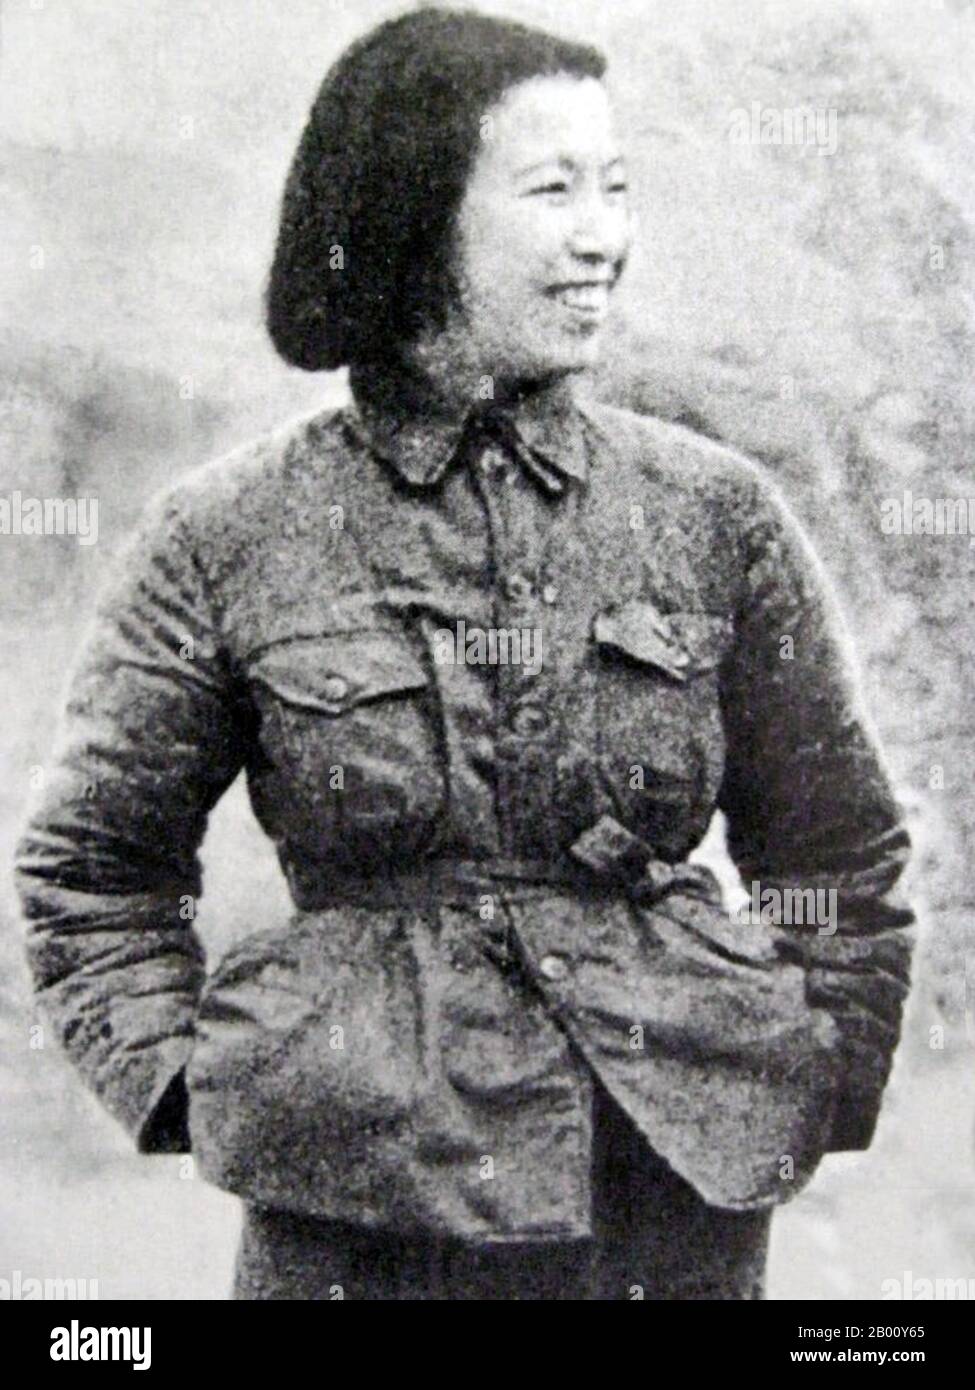 China: A rare picture of the young Jiang Qing (1914-1991) in Yan'an, c. 1938.  Jiang Qing (Chiang Ch'ing, March 1914 – May 14, 1991), birth name Li Shumeng, was the pseudonym that was used by Chinese leader Mao Zedong's last wife, a major Communist Party of China power figure.  She went by the stage name Lan Ping during her acting career, and was known by various other names during her life. She married Mao in Yan'an in November 1938, and is sometimes referred to as Madame Mao in Western literature, serving as Communist China's first first lady. Stock Photo